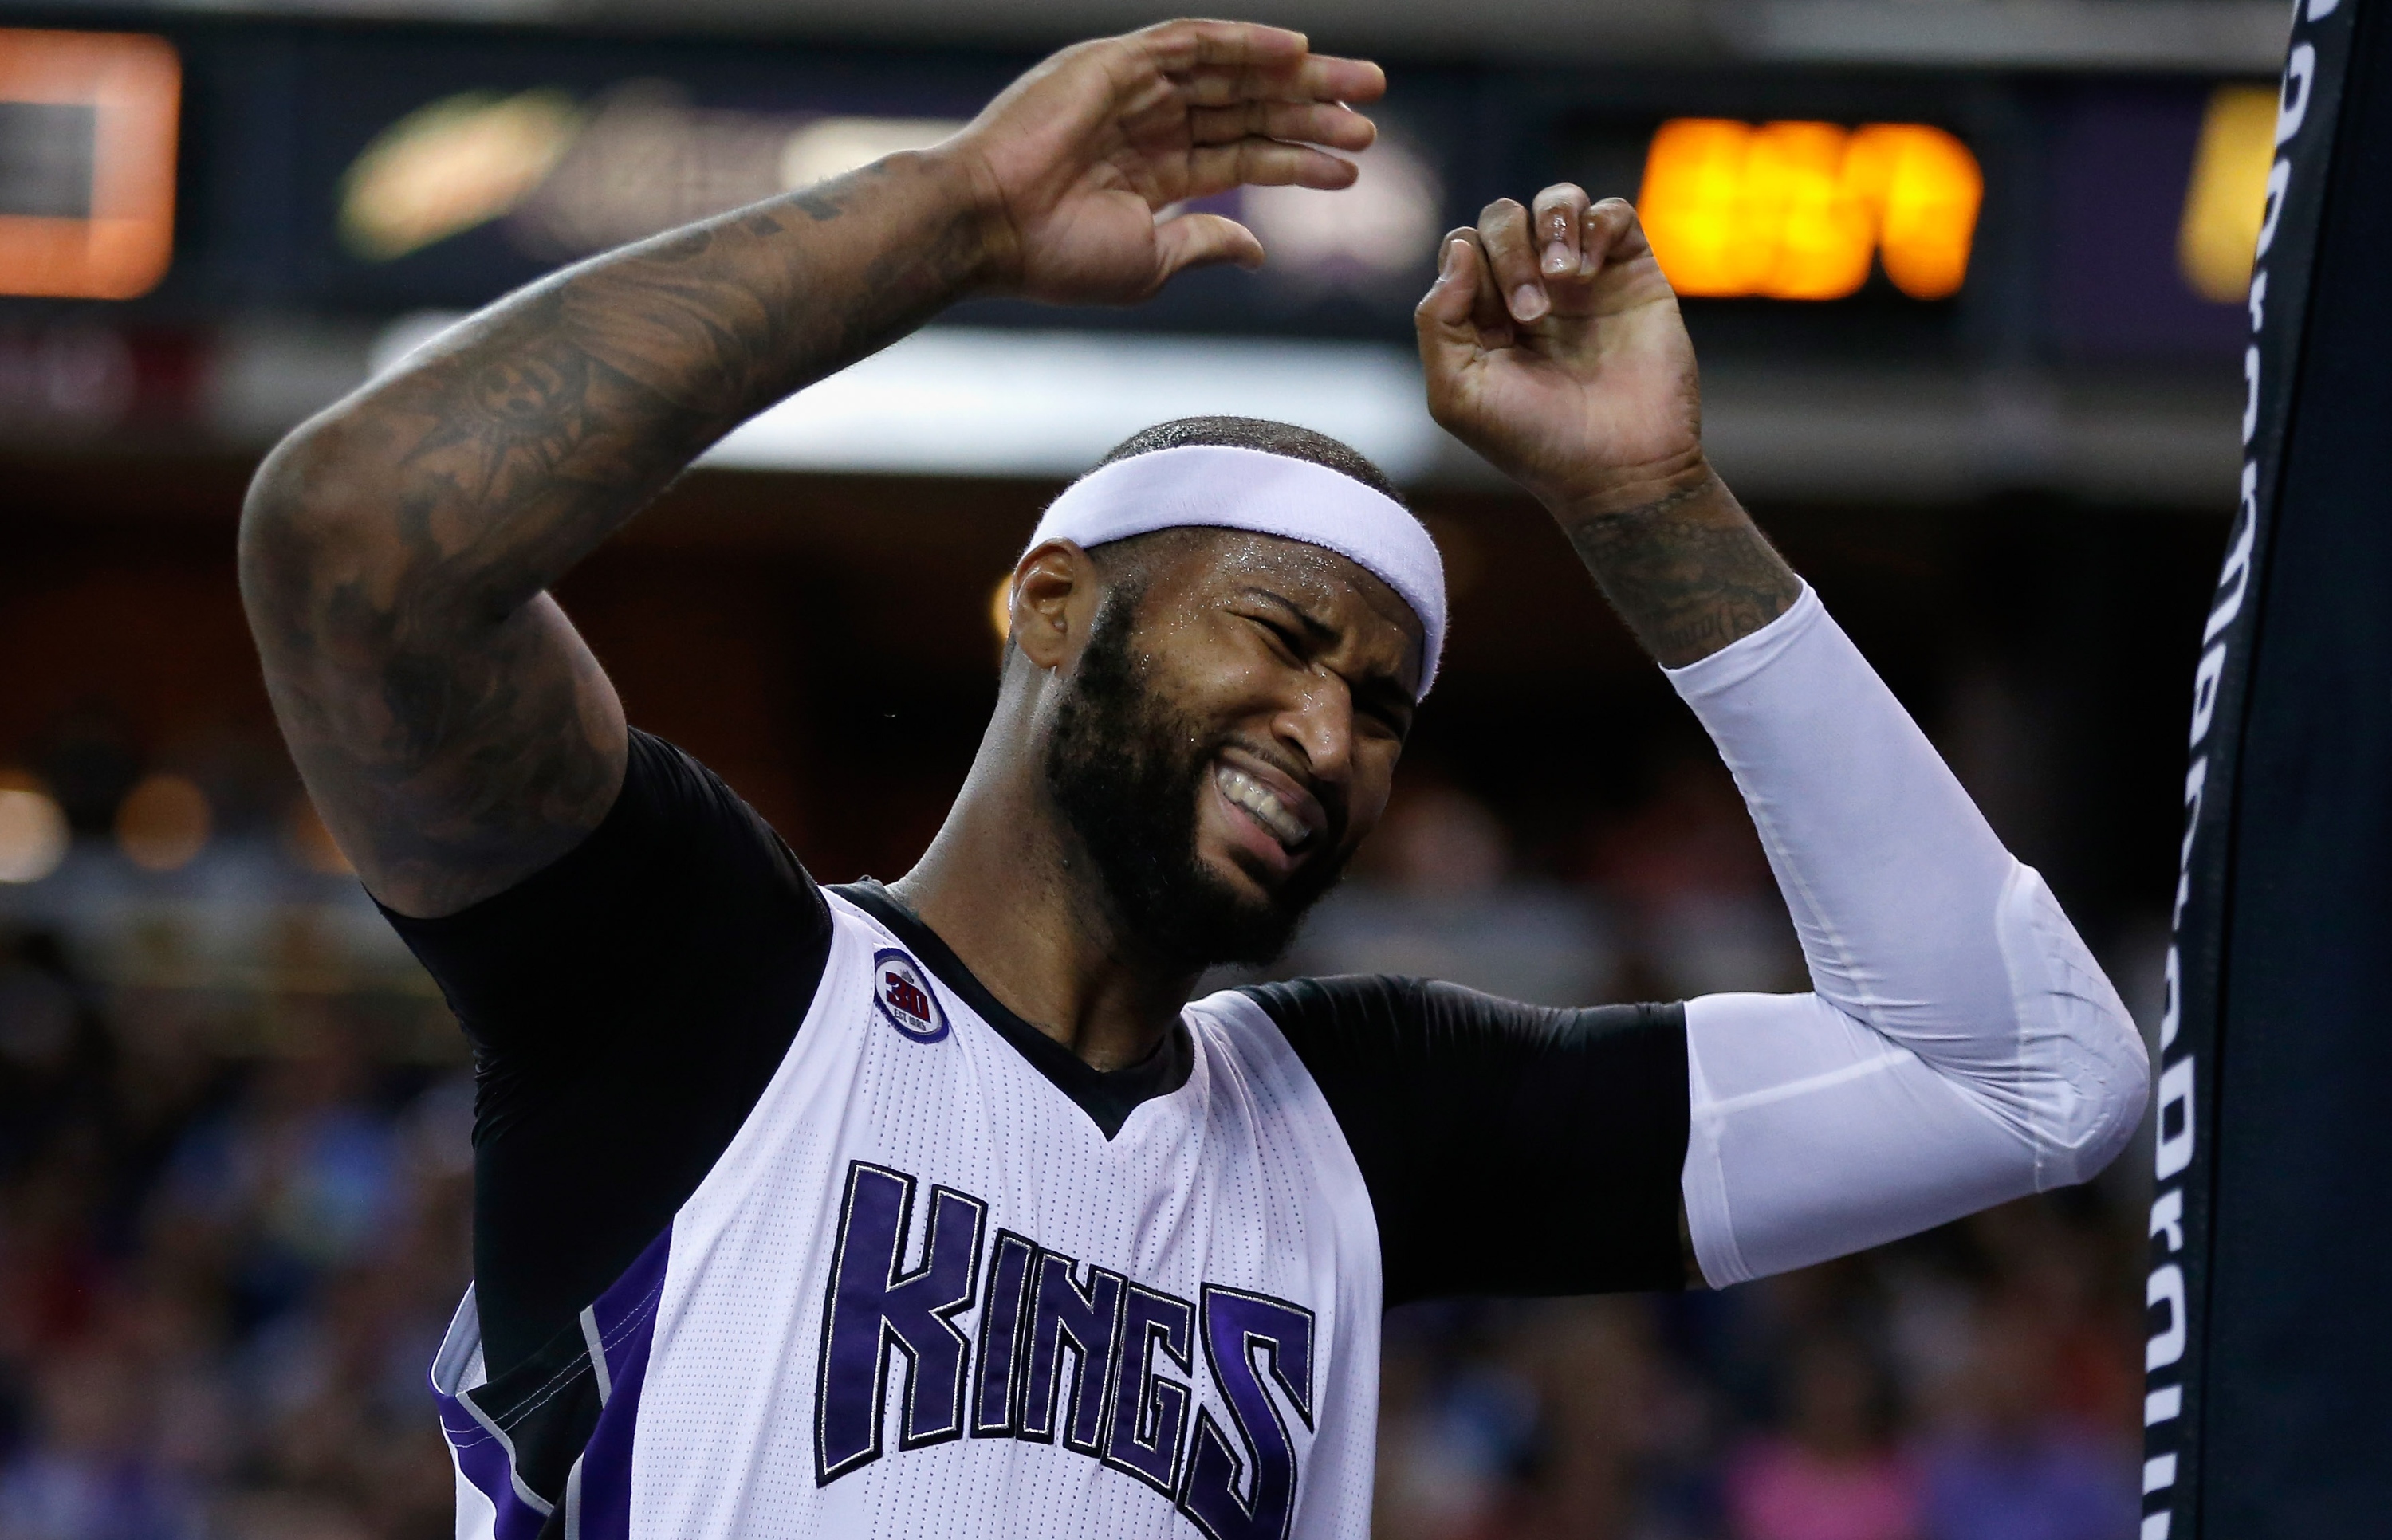 DeMarcus Cousins might not like being on this list. (Ezra Shaw/Getty Images)